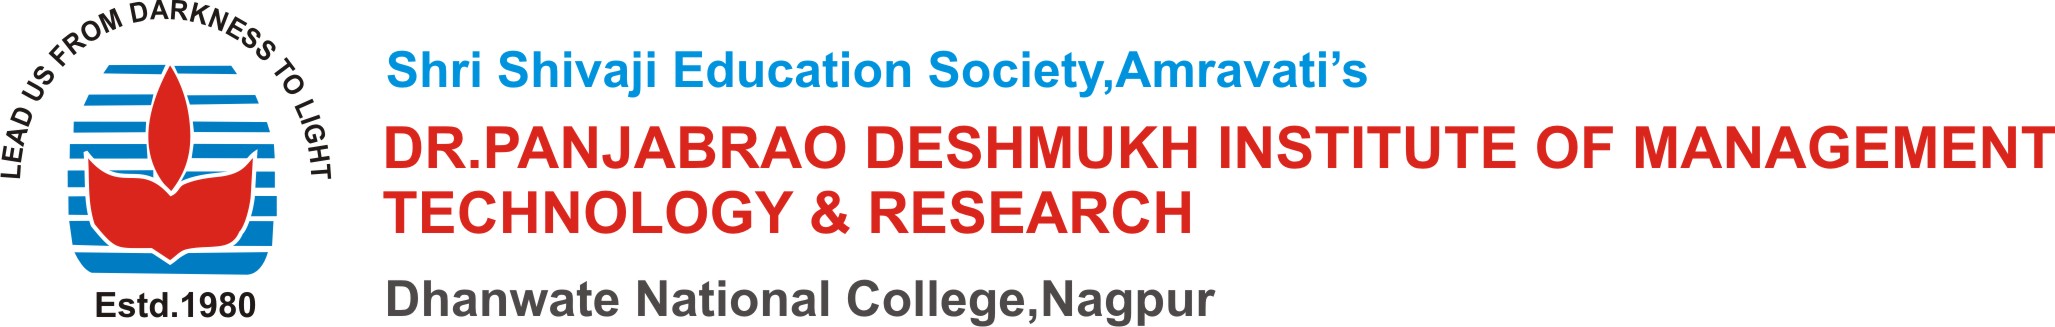 DR. PANJABRAO DESHMUKH INSTITUTE OF MANAGEMENT TECHNOLOGY AND RESEARCH